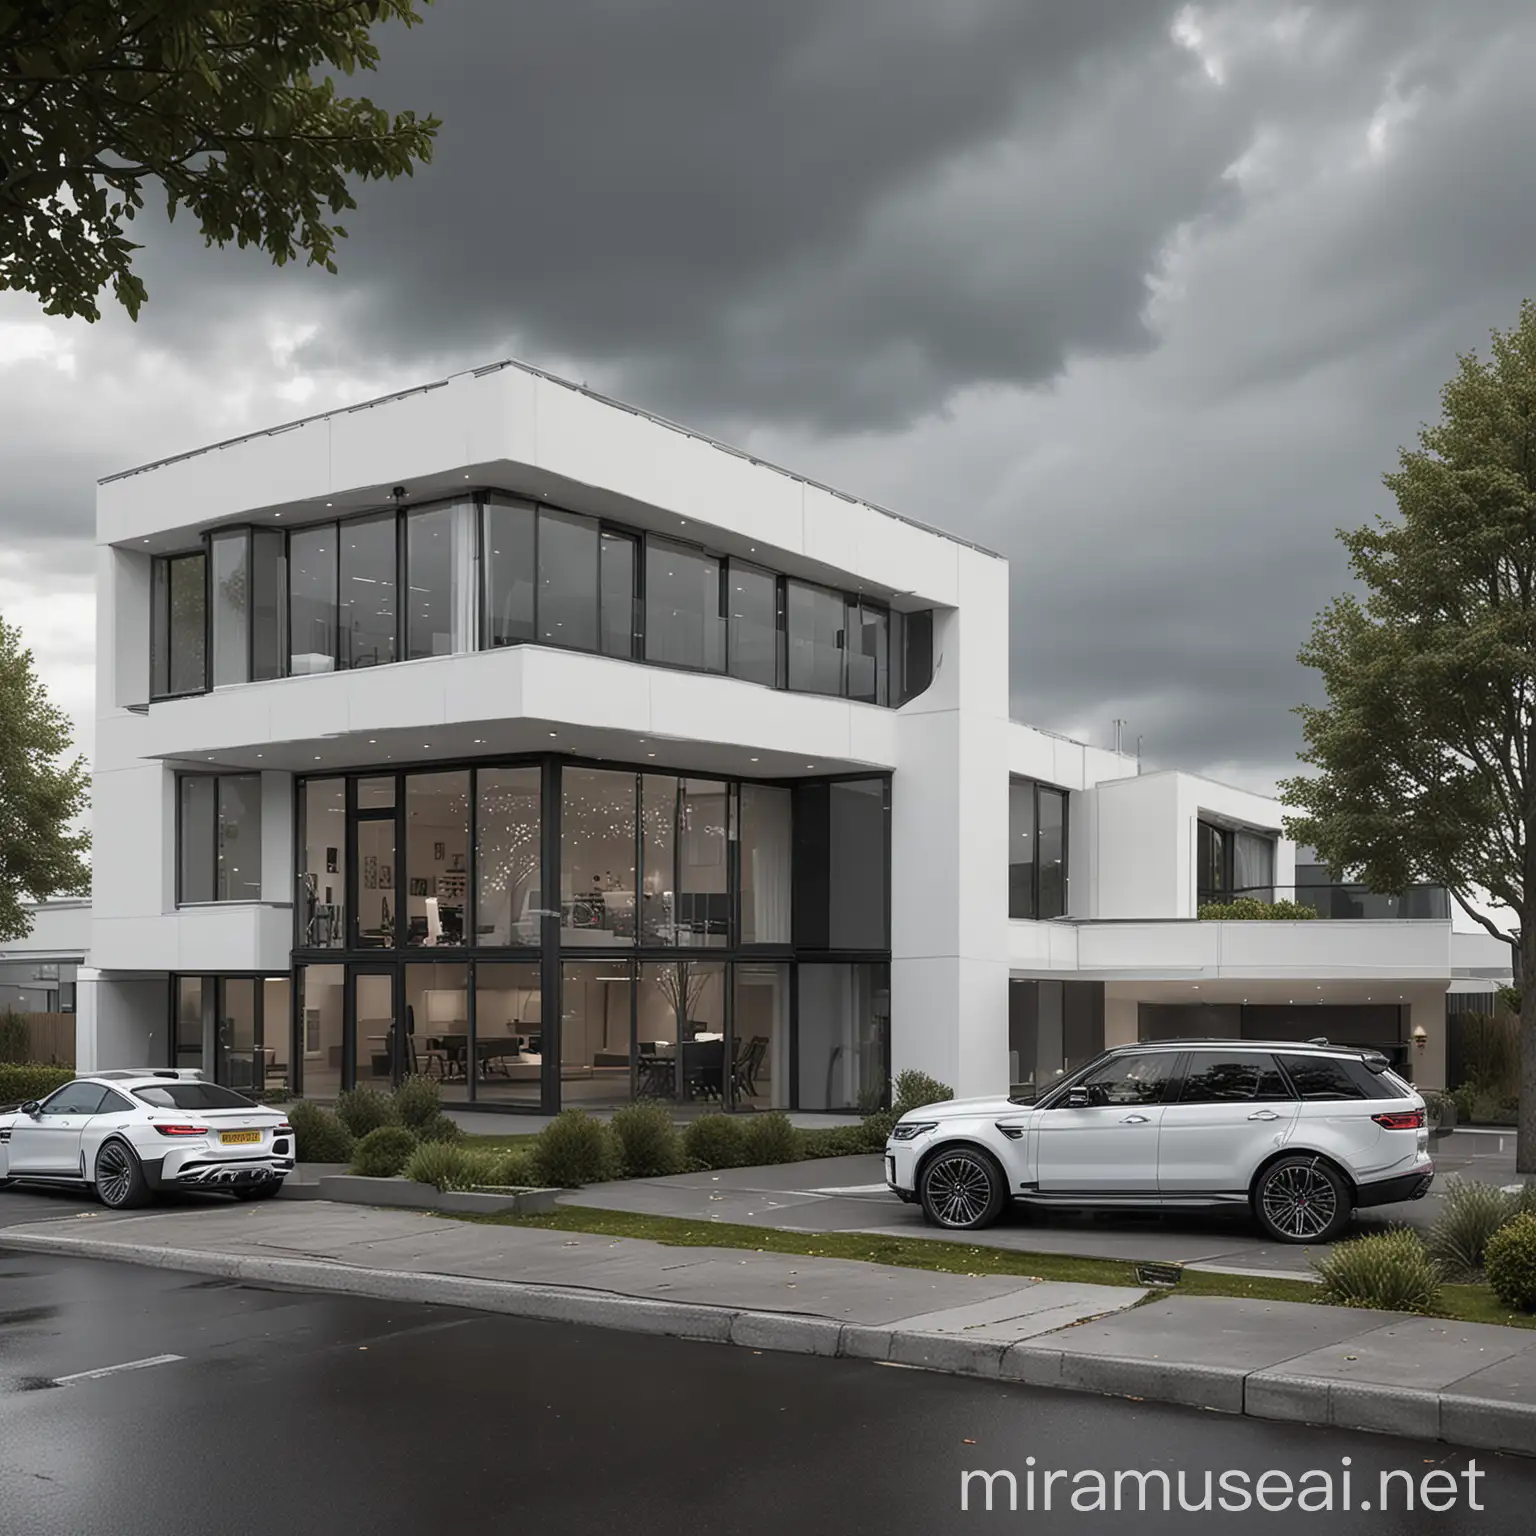 Contemporary Modular House with Display Windows and Luxury Cars